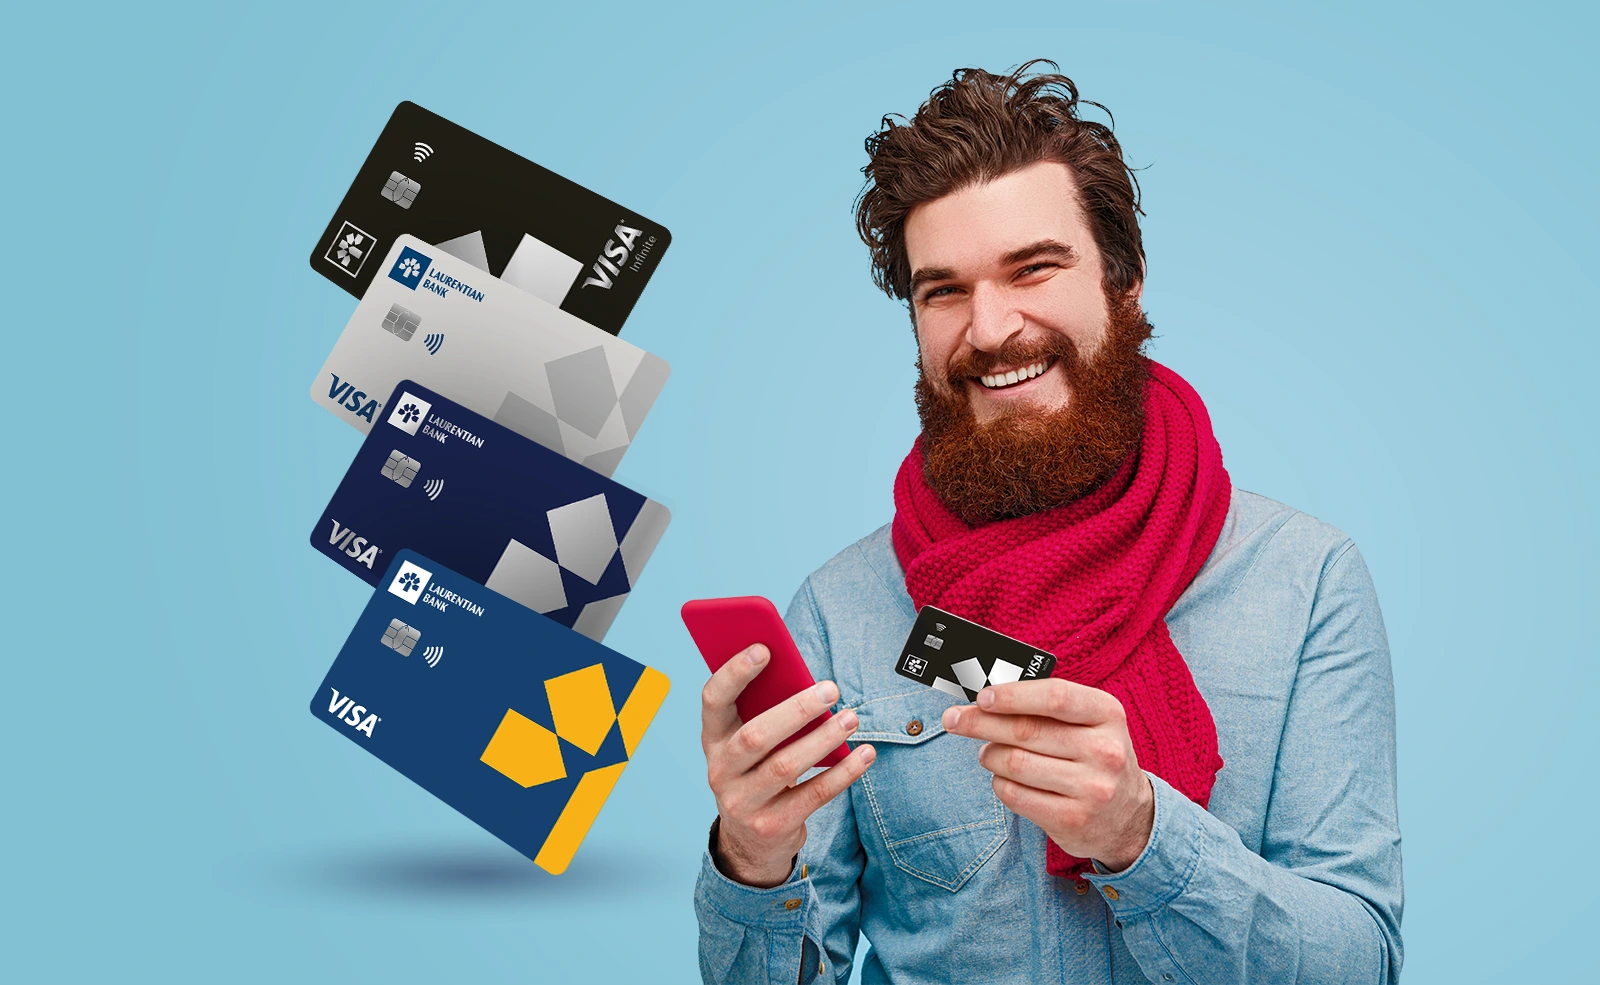 A man smiles while holding his phone in one hand and credit card in the other. Beside him, 4 credit cards are stacked: Laurentian Bank Visa Infinite*, Laurentian Bank Visa* Reduced Rate, Laurentian Bank Visa* Cashback, and Laurentian Bank Visa* Reward Me.